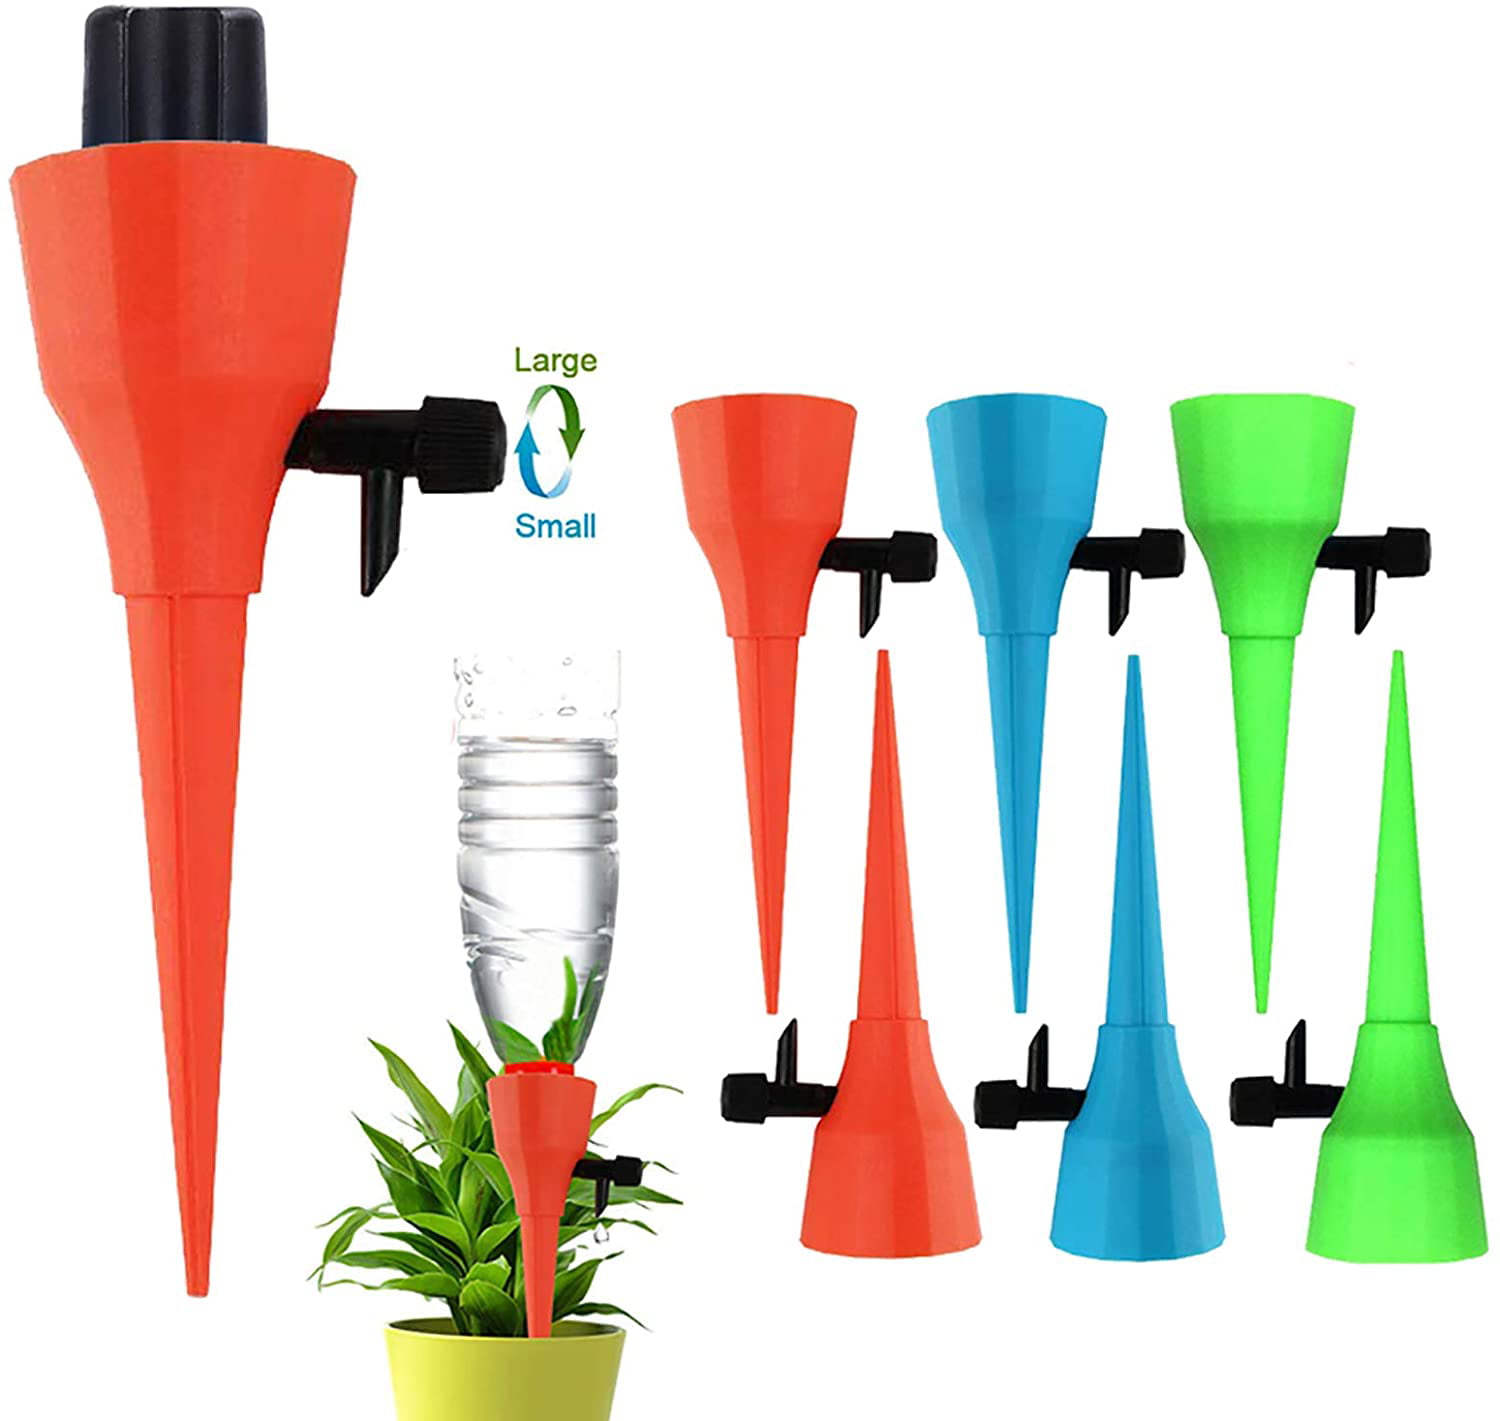 Self Watering Devices Adjustable Water Volume Drip System-12Pack Self Watering Spikes 2 Size Automatic Plant Waterer Slow Release Control Valve Switch Automatic Irrigation Watering Drip System 